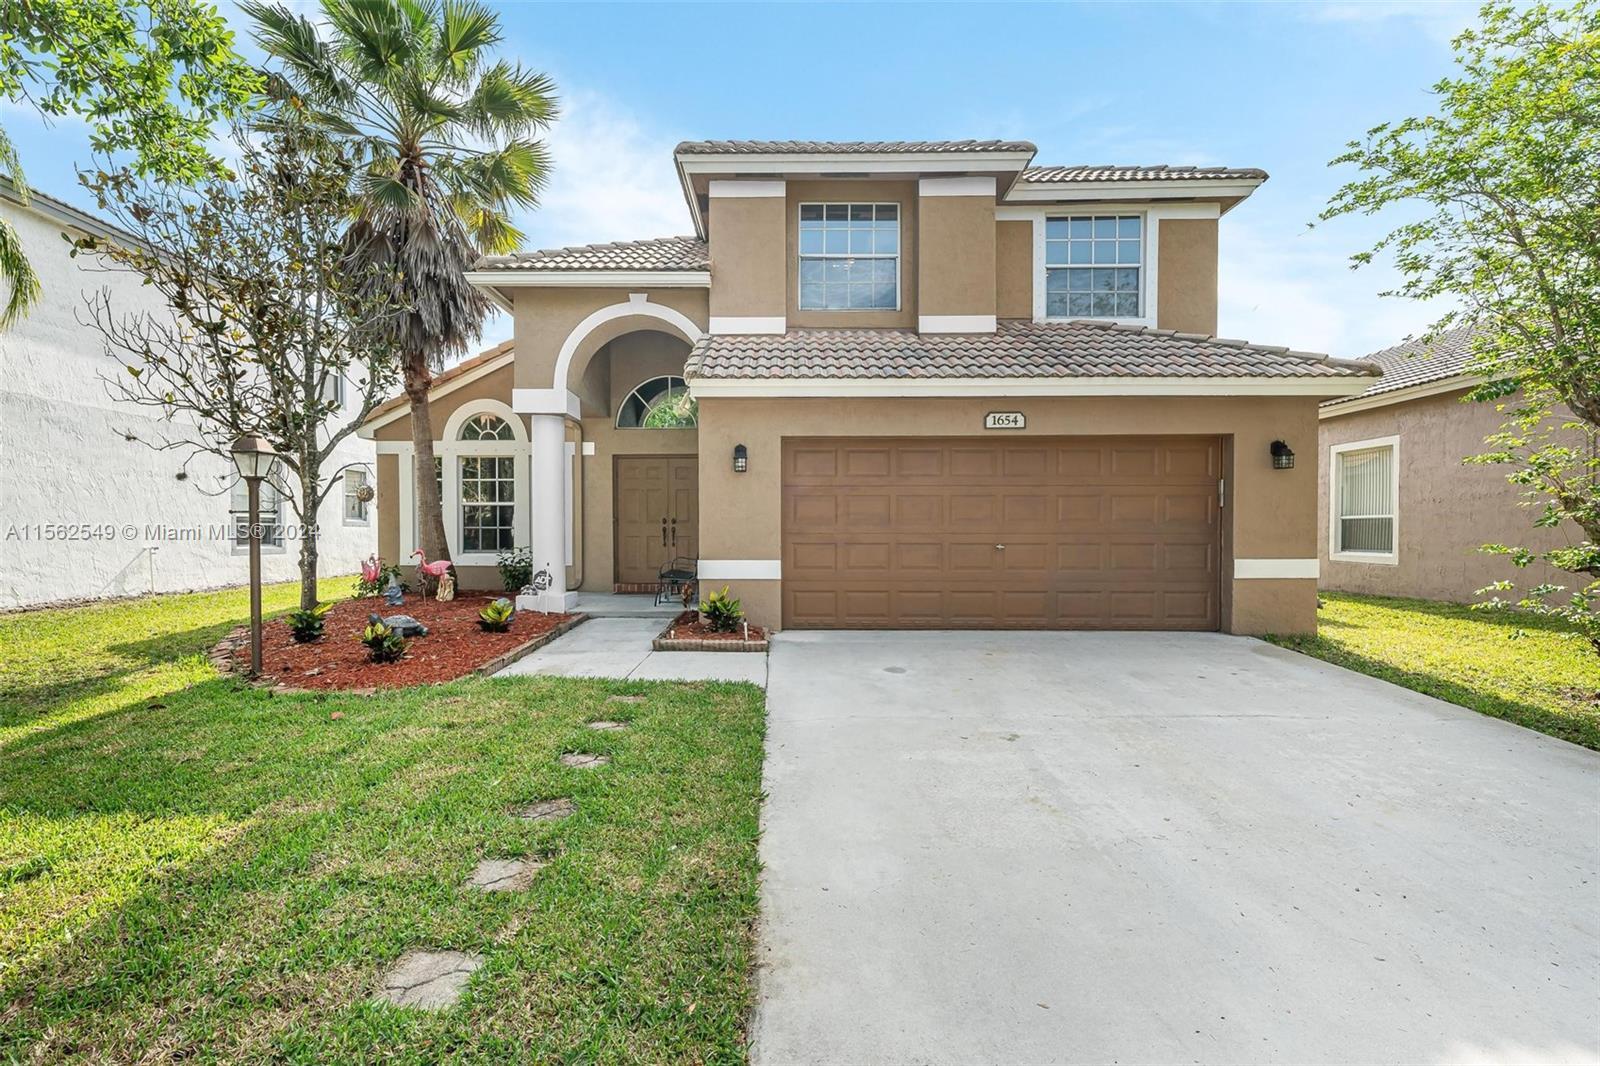 Photo of 1654 NW 144th Wy in Pembroke Pines, FL